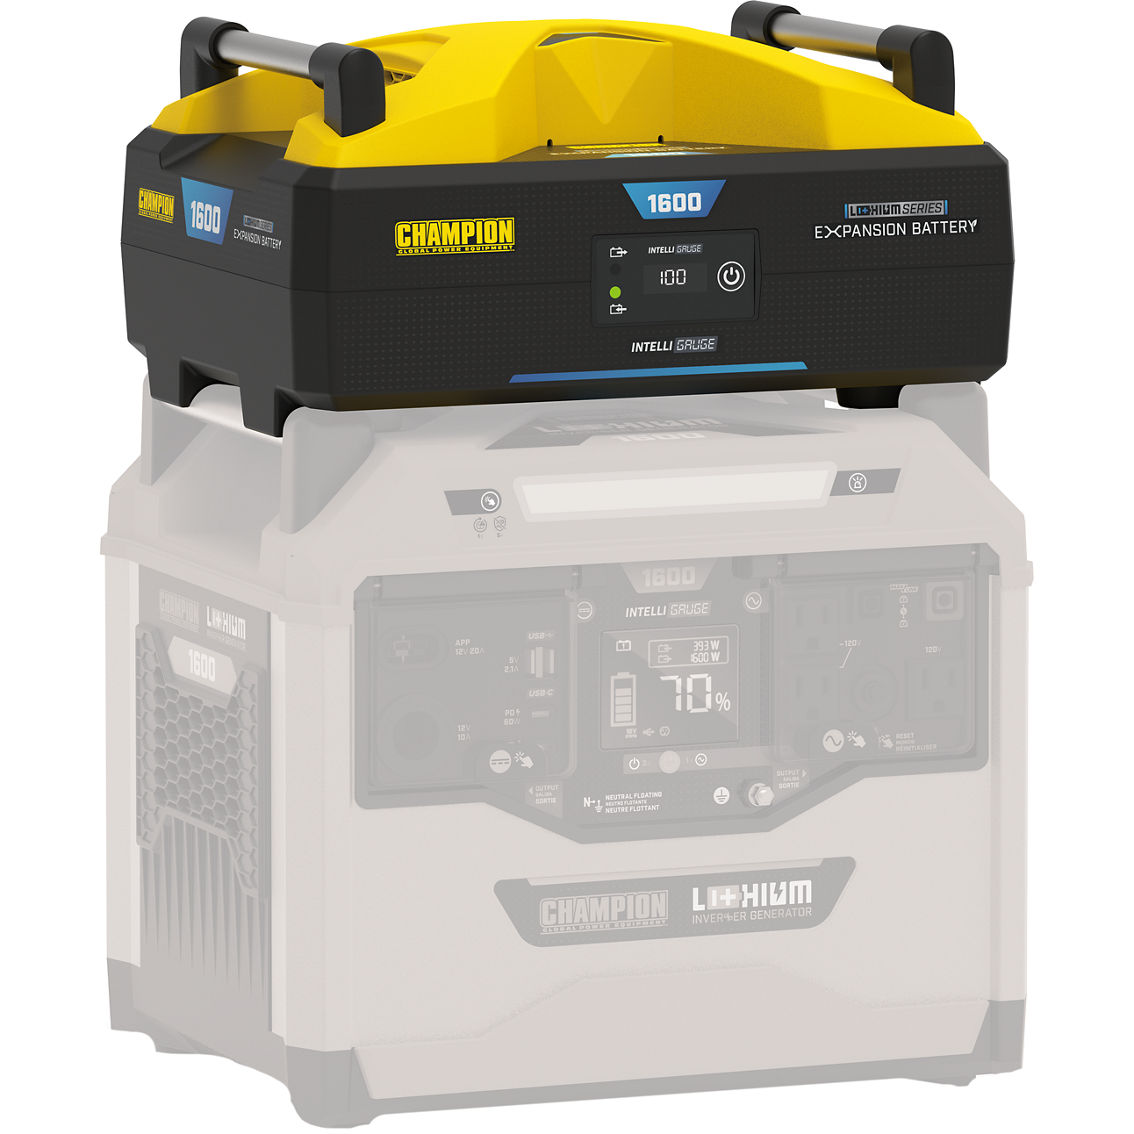 Champion 1638-Wh Li-Ion Power Station Expansion Battery - Image 2 of 9